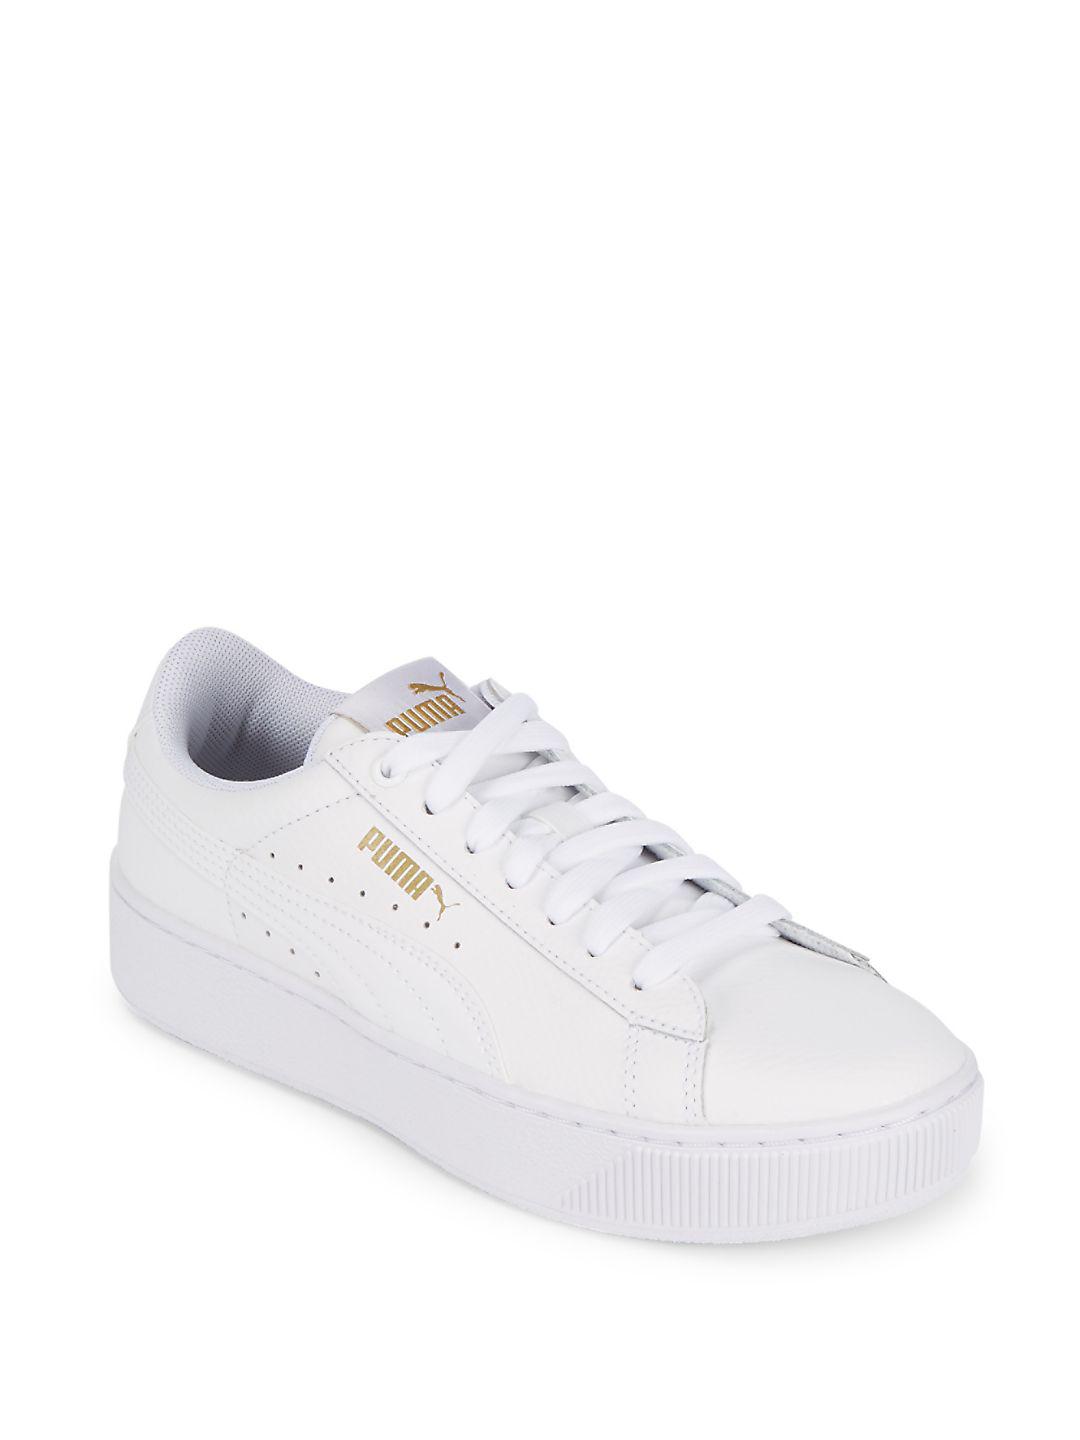 PUMA Lace-up Round Toe Sneakers in White | Lyst